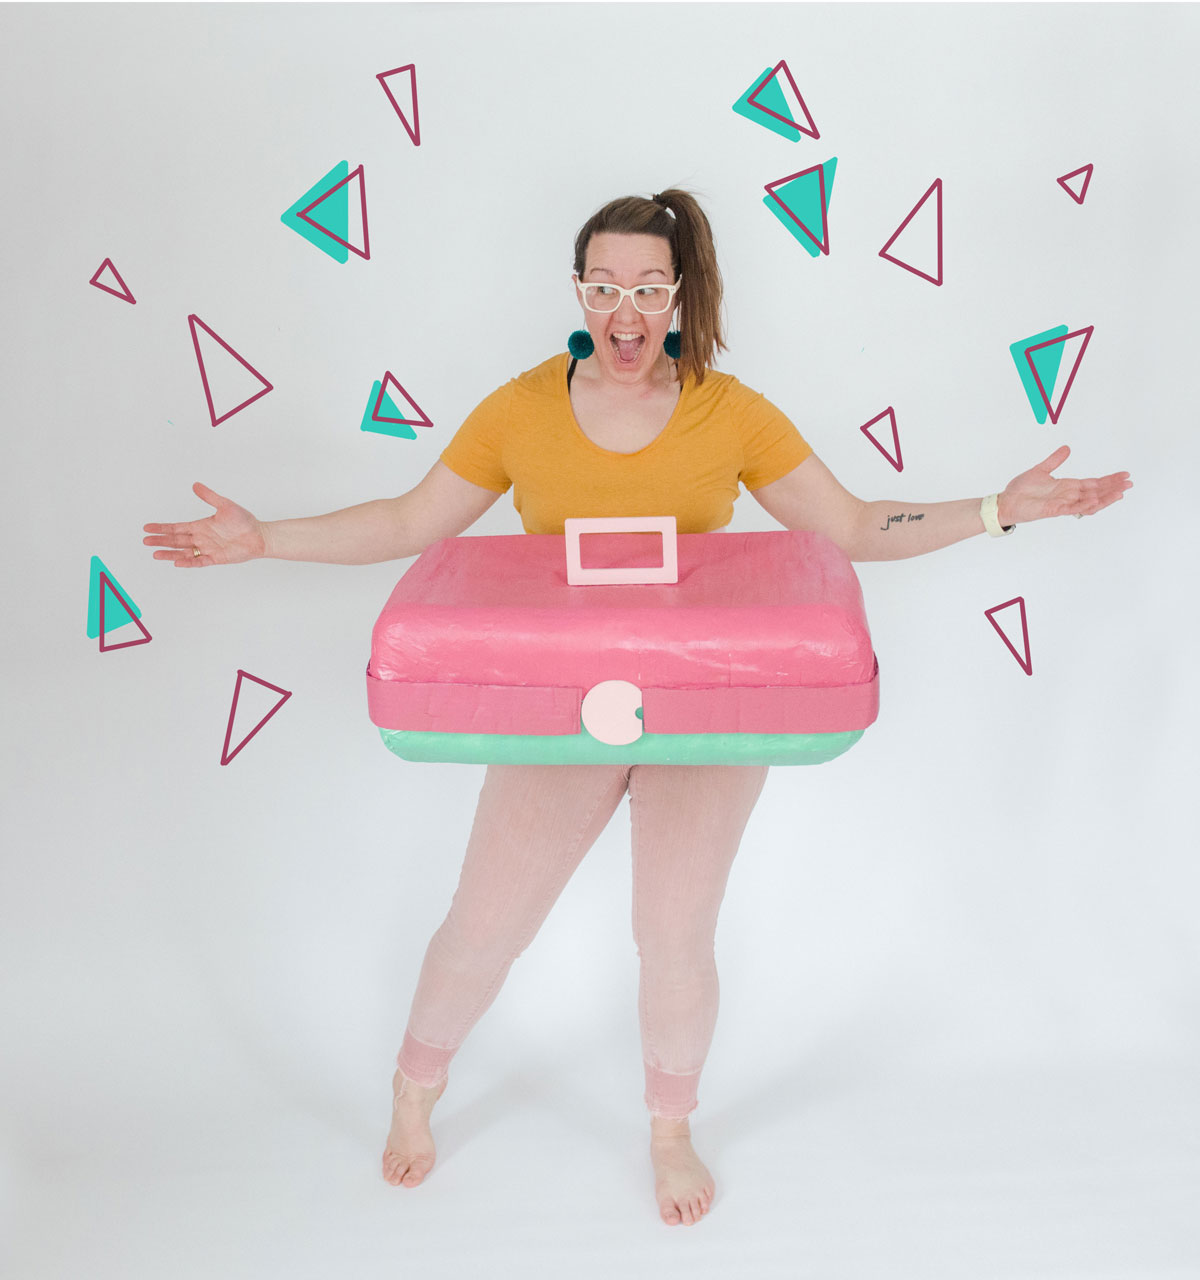 How to make a caboodle costume, caboodle costume DIY, costume DIY, oh yay costume challenge, emily steffen costumes, paper mâché costume, DIY paper mâché costume, 80s inspired costume